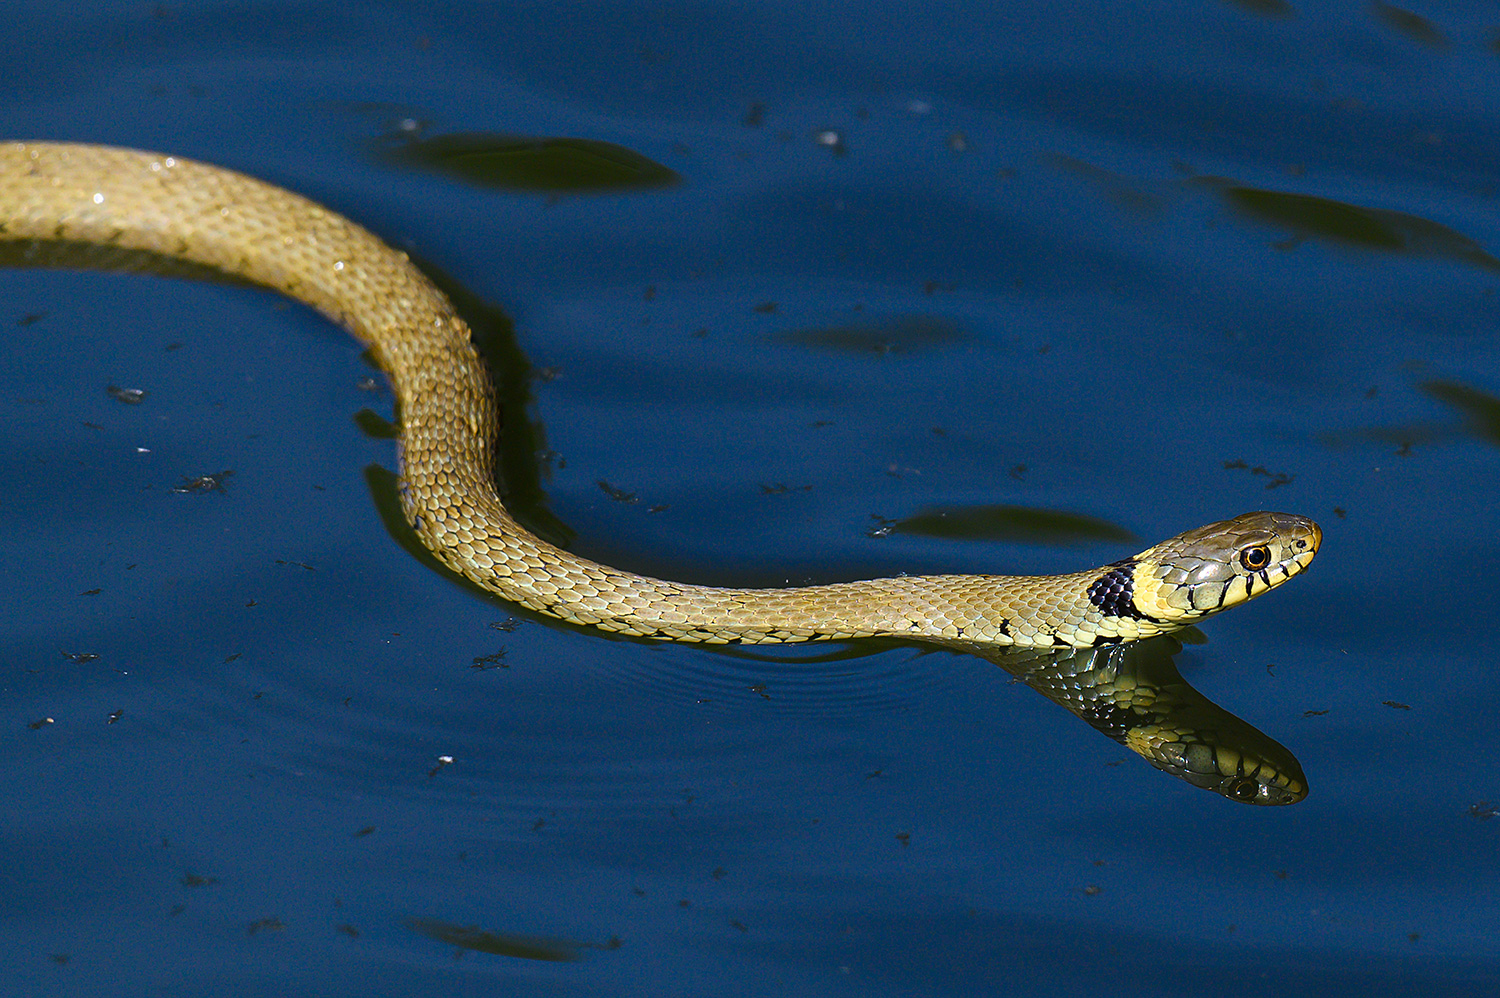 Picture of the head of a swimming Grass Snake reflecting on the water